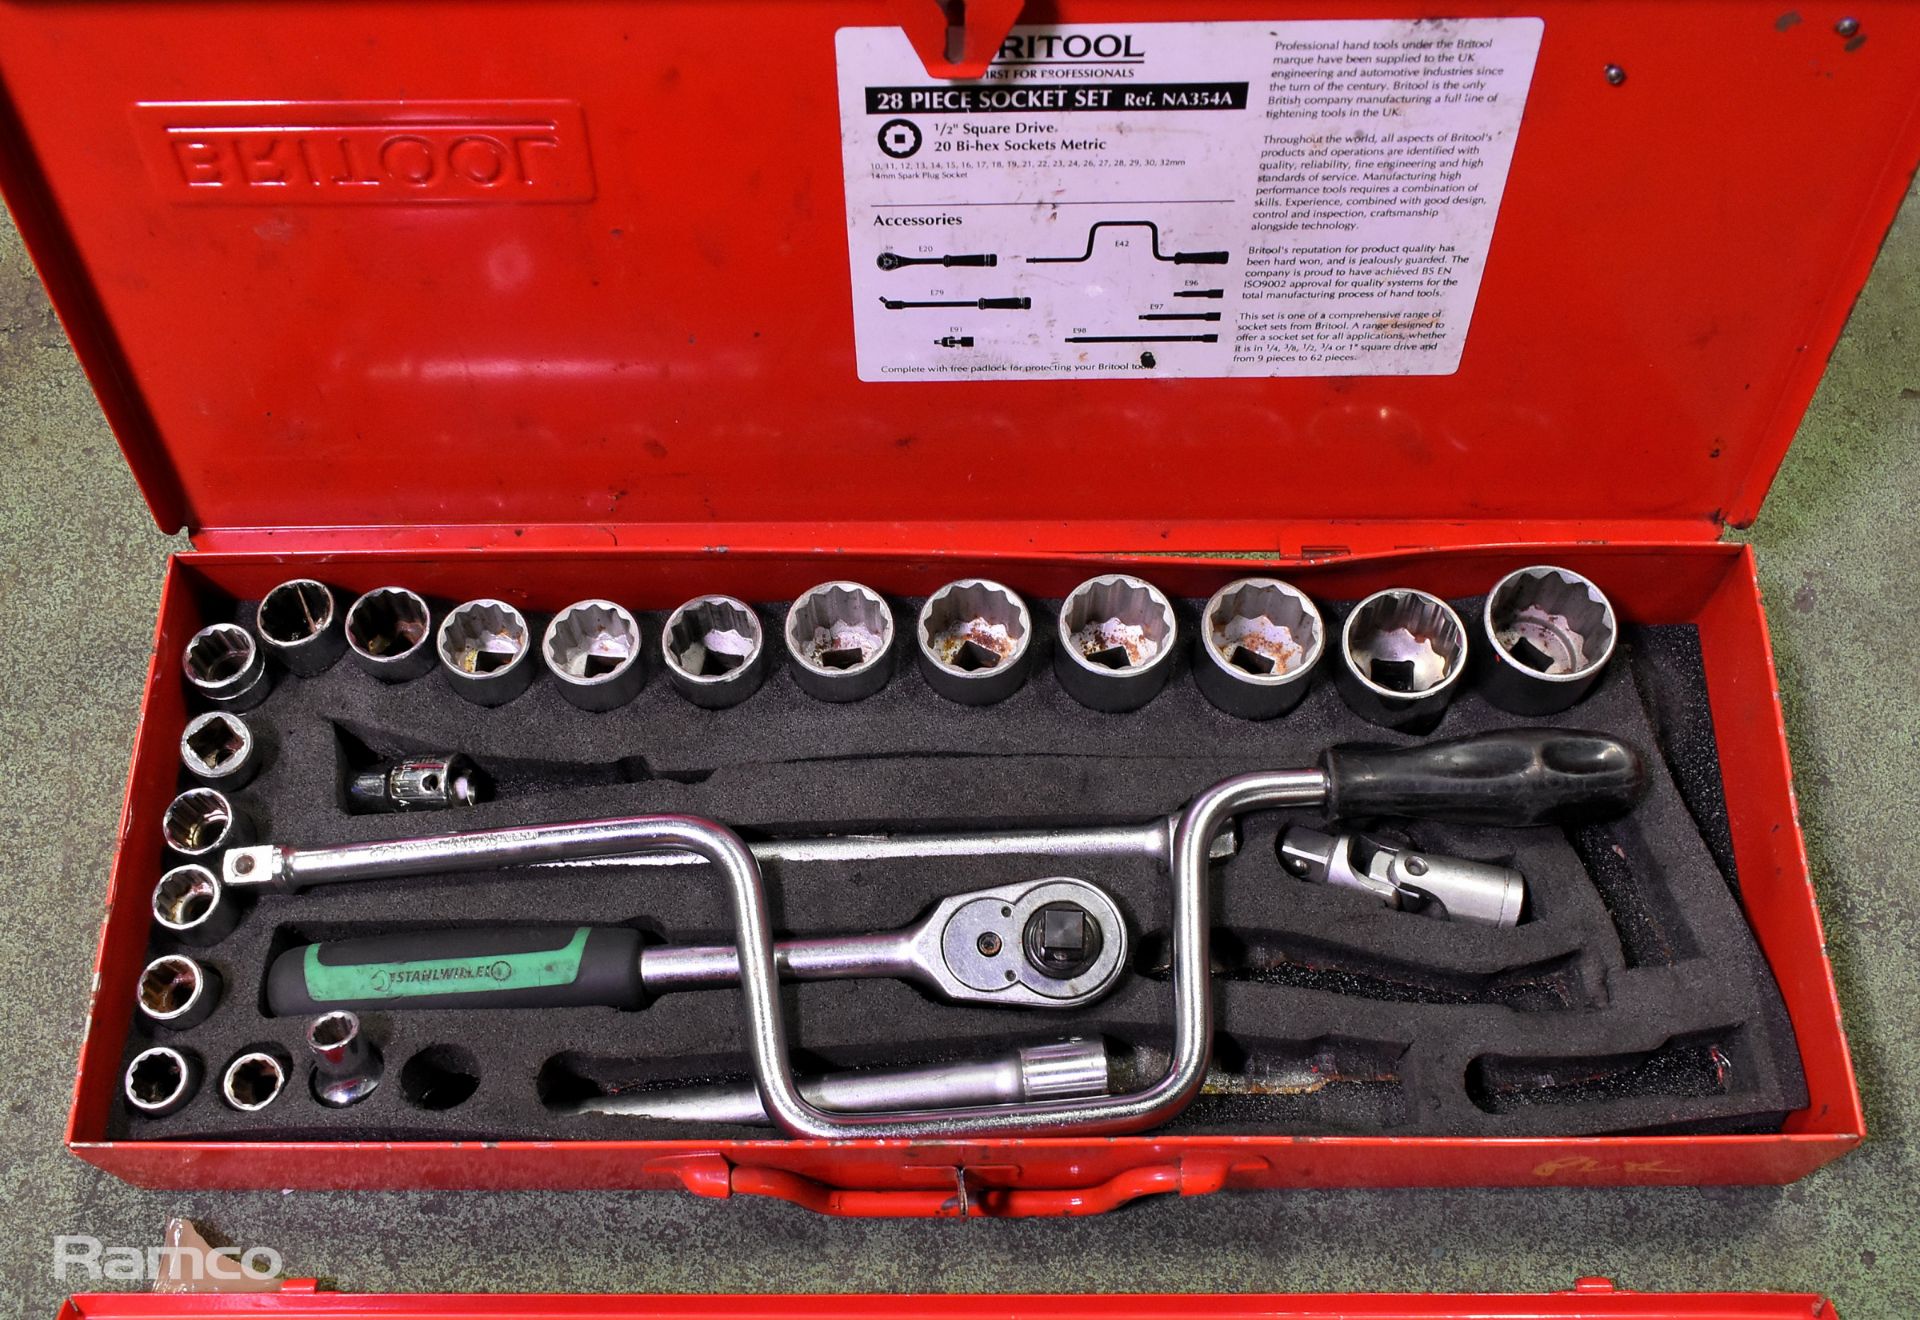 2x 1/2 inch drive socket sets - 10mm to 32mm - Image 2 of 5